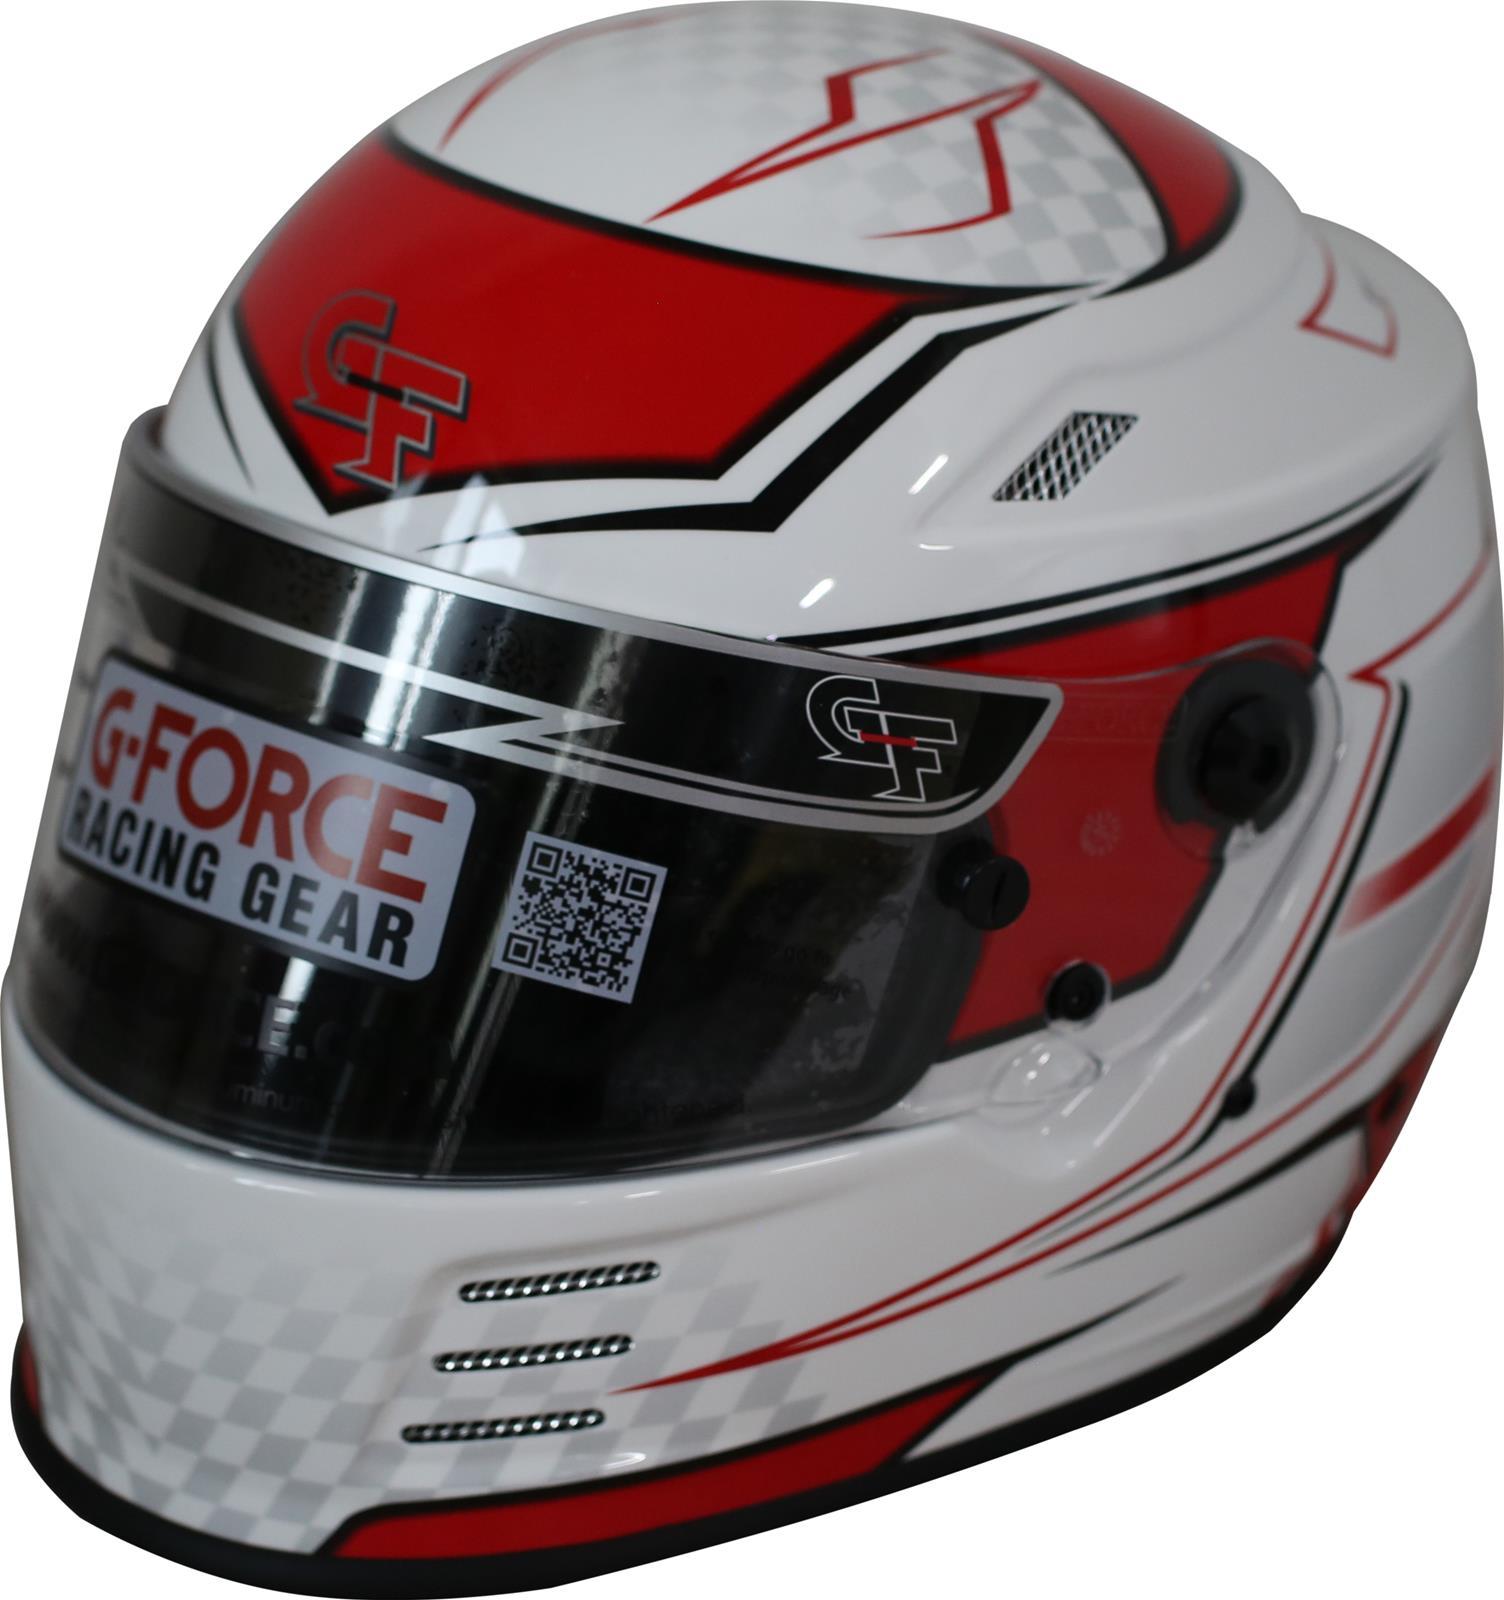 G-Force Racing Gear 13005SMLRD Helmet, Revo Graphics, Full Face, Snell SA2020, Head and Neck Support Ready, White / Red, Small, Each